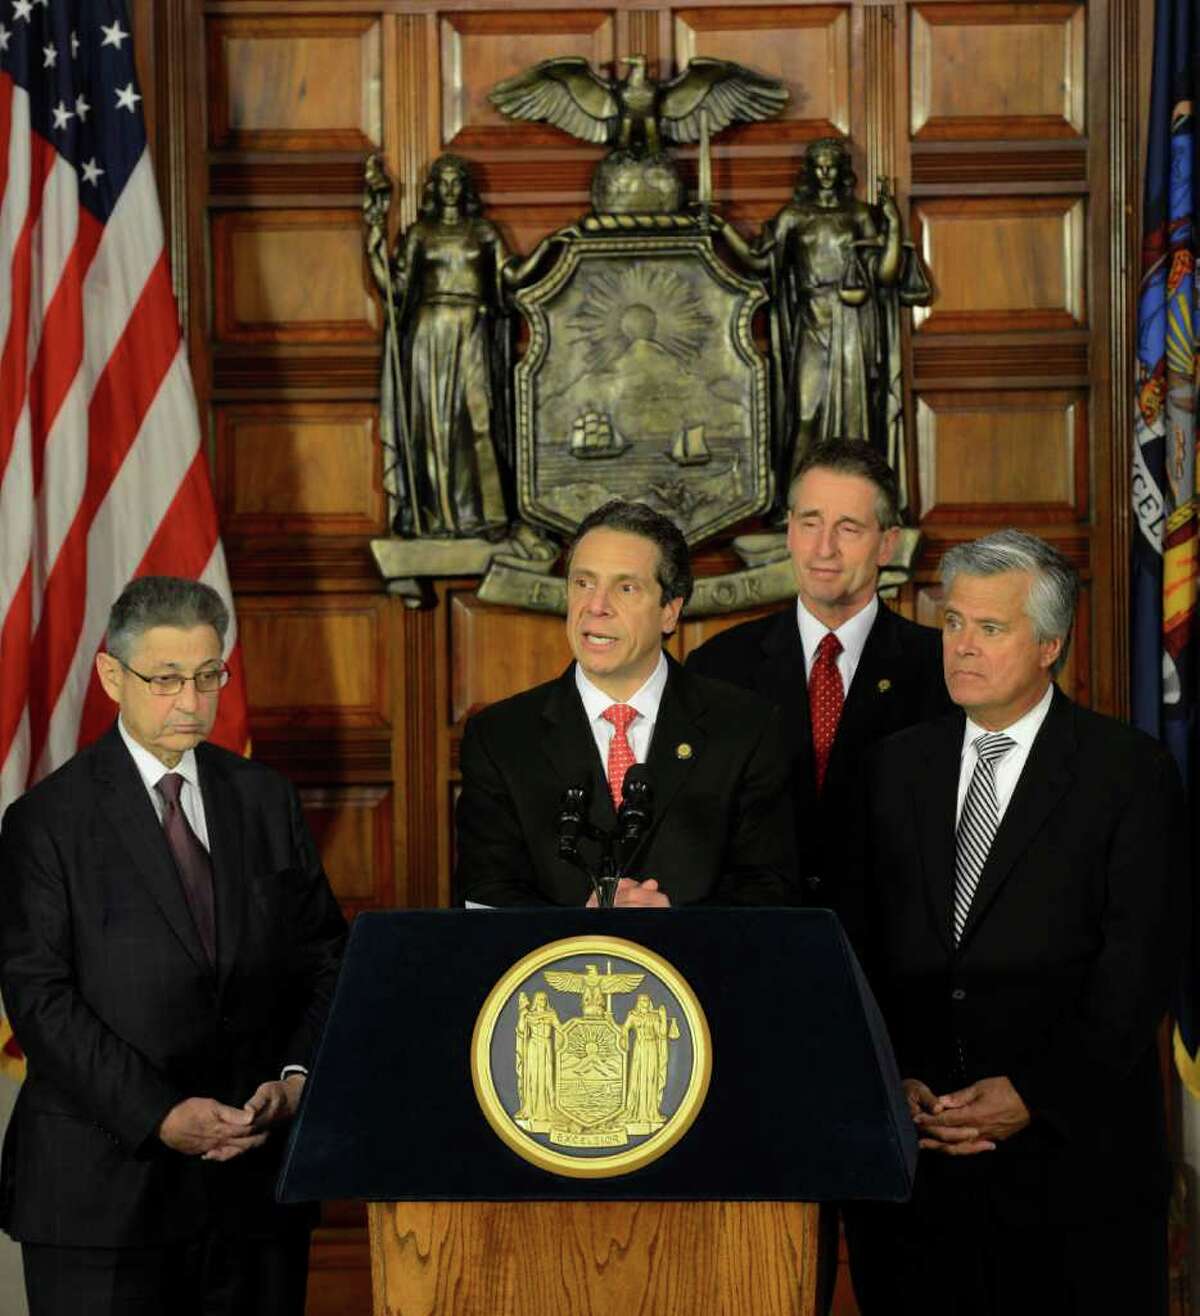 Everyone is all smiles as Assembly Speaker Shelly Silver, left joins Governor Andrew Cuomo, center and Senate Majority Leader Dean Skelos, right and Lt. Governor Bob Duffy, rear in celebrating an on-time budget during a press conference at the State Capitol in Albany, N.Y. March 30, 2012. (Skip Dickstein / Times Union)